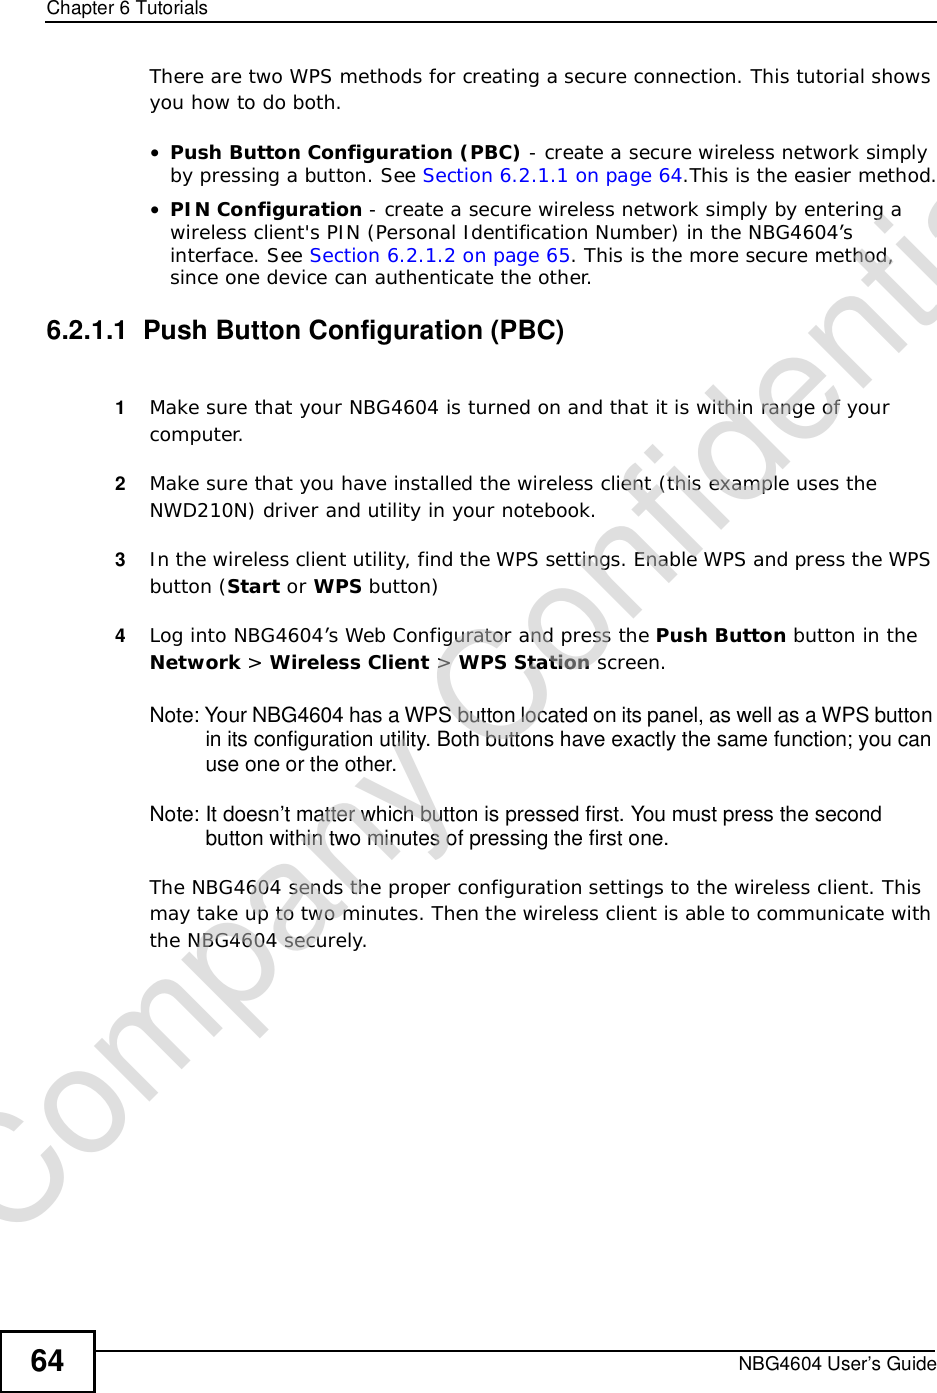 Chapter 6TutorialsNBG4604 User’s Guide64There are two WPS methods for creating a secure connection. This tutorial shows you how to do both.•Push Button Configuration (PBC) - create a secure wireless network simply by pressing a button. See Section 6.2.1.1 on page 64.This is the easier method.•PIN Configuration - create a secure wireless network simply by entering a wireless client&apos;s PIN (Personal Identification Number) in the NBG4604’s interface. See Section 6.2.1.2 on page 65. This is the more secure method, since one device can authenticate the other.6.2.1.1  Push Button Configuration (PBC)1Make sure that your NBG4604 is turned on and that it is within range of your computer. 2Make sure that you have installed the wireless client (this example uses the NWD210N) driver and utility in your notebook.3In the wireless client utility, find the WPS settings. Enable WPS and press the WPS button (Start or WPS button)4Log into NBG4604’s Web Configurator and press the Push Button button in the Network &gt; Wireless Client &gt;WPS Station screen. Note: Your NBG4604 has a WPS button located on its panel, as well as a WPS button in its configuration utility. Both buttons have exactly the same function; you can use one or the other.Note: It doesn’t matter which button is pressed first. You must press the second button within two minutes of pressing the first one. The NBG4604 sends the proper configuration settings to the wireless client. This may take up to two minutes. Then the wireless client is able to communicate with the NBG4604 securely. Company Confidential